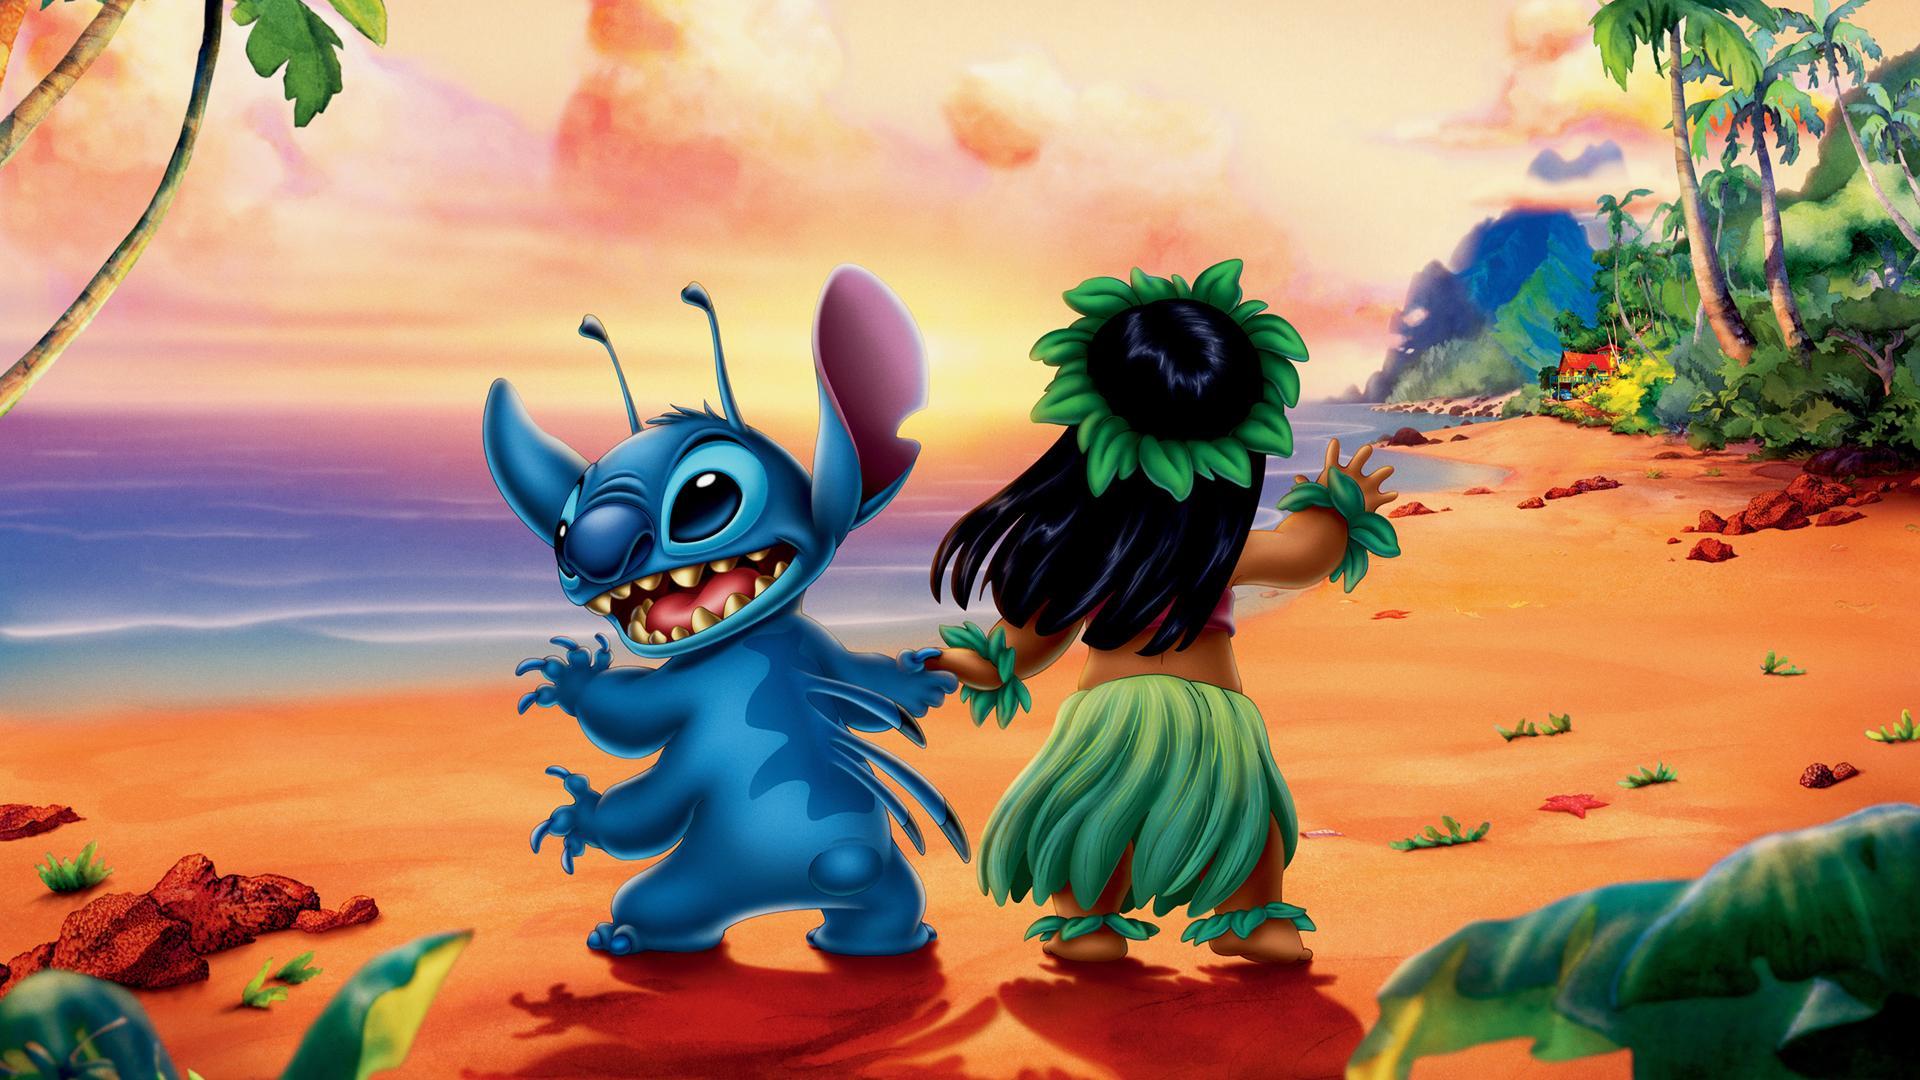 Stunning Lilo And Stitch Desktop Wallpaper image For Free